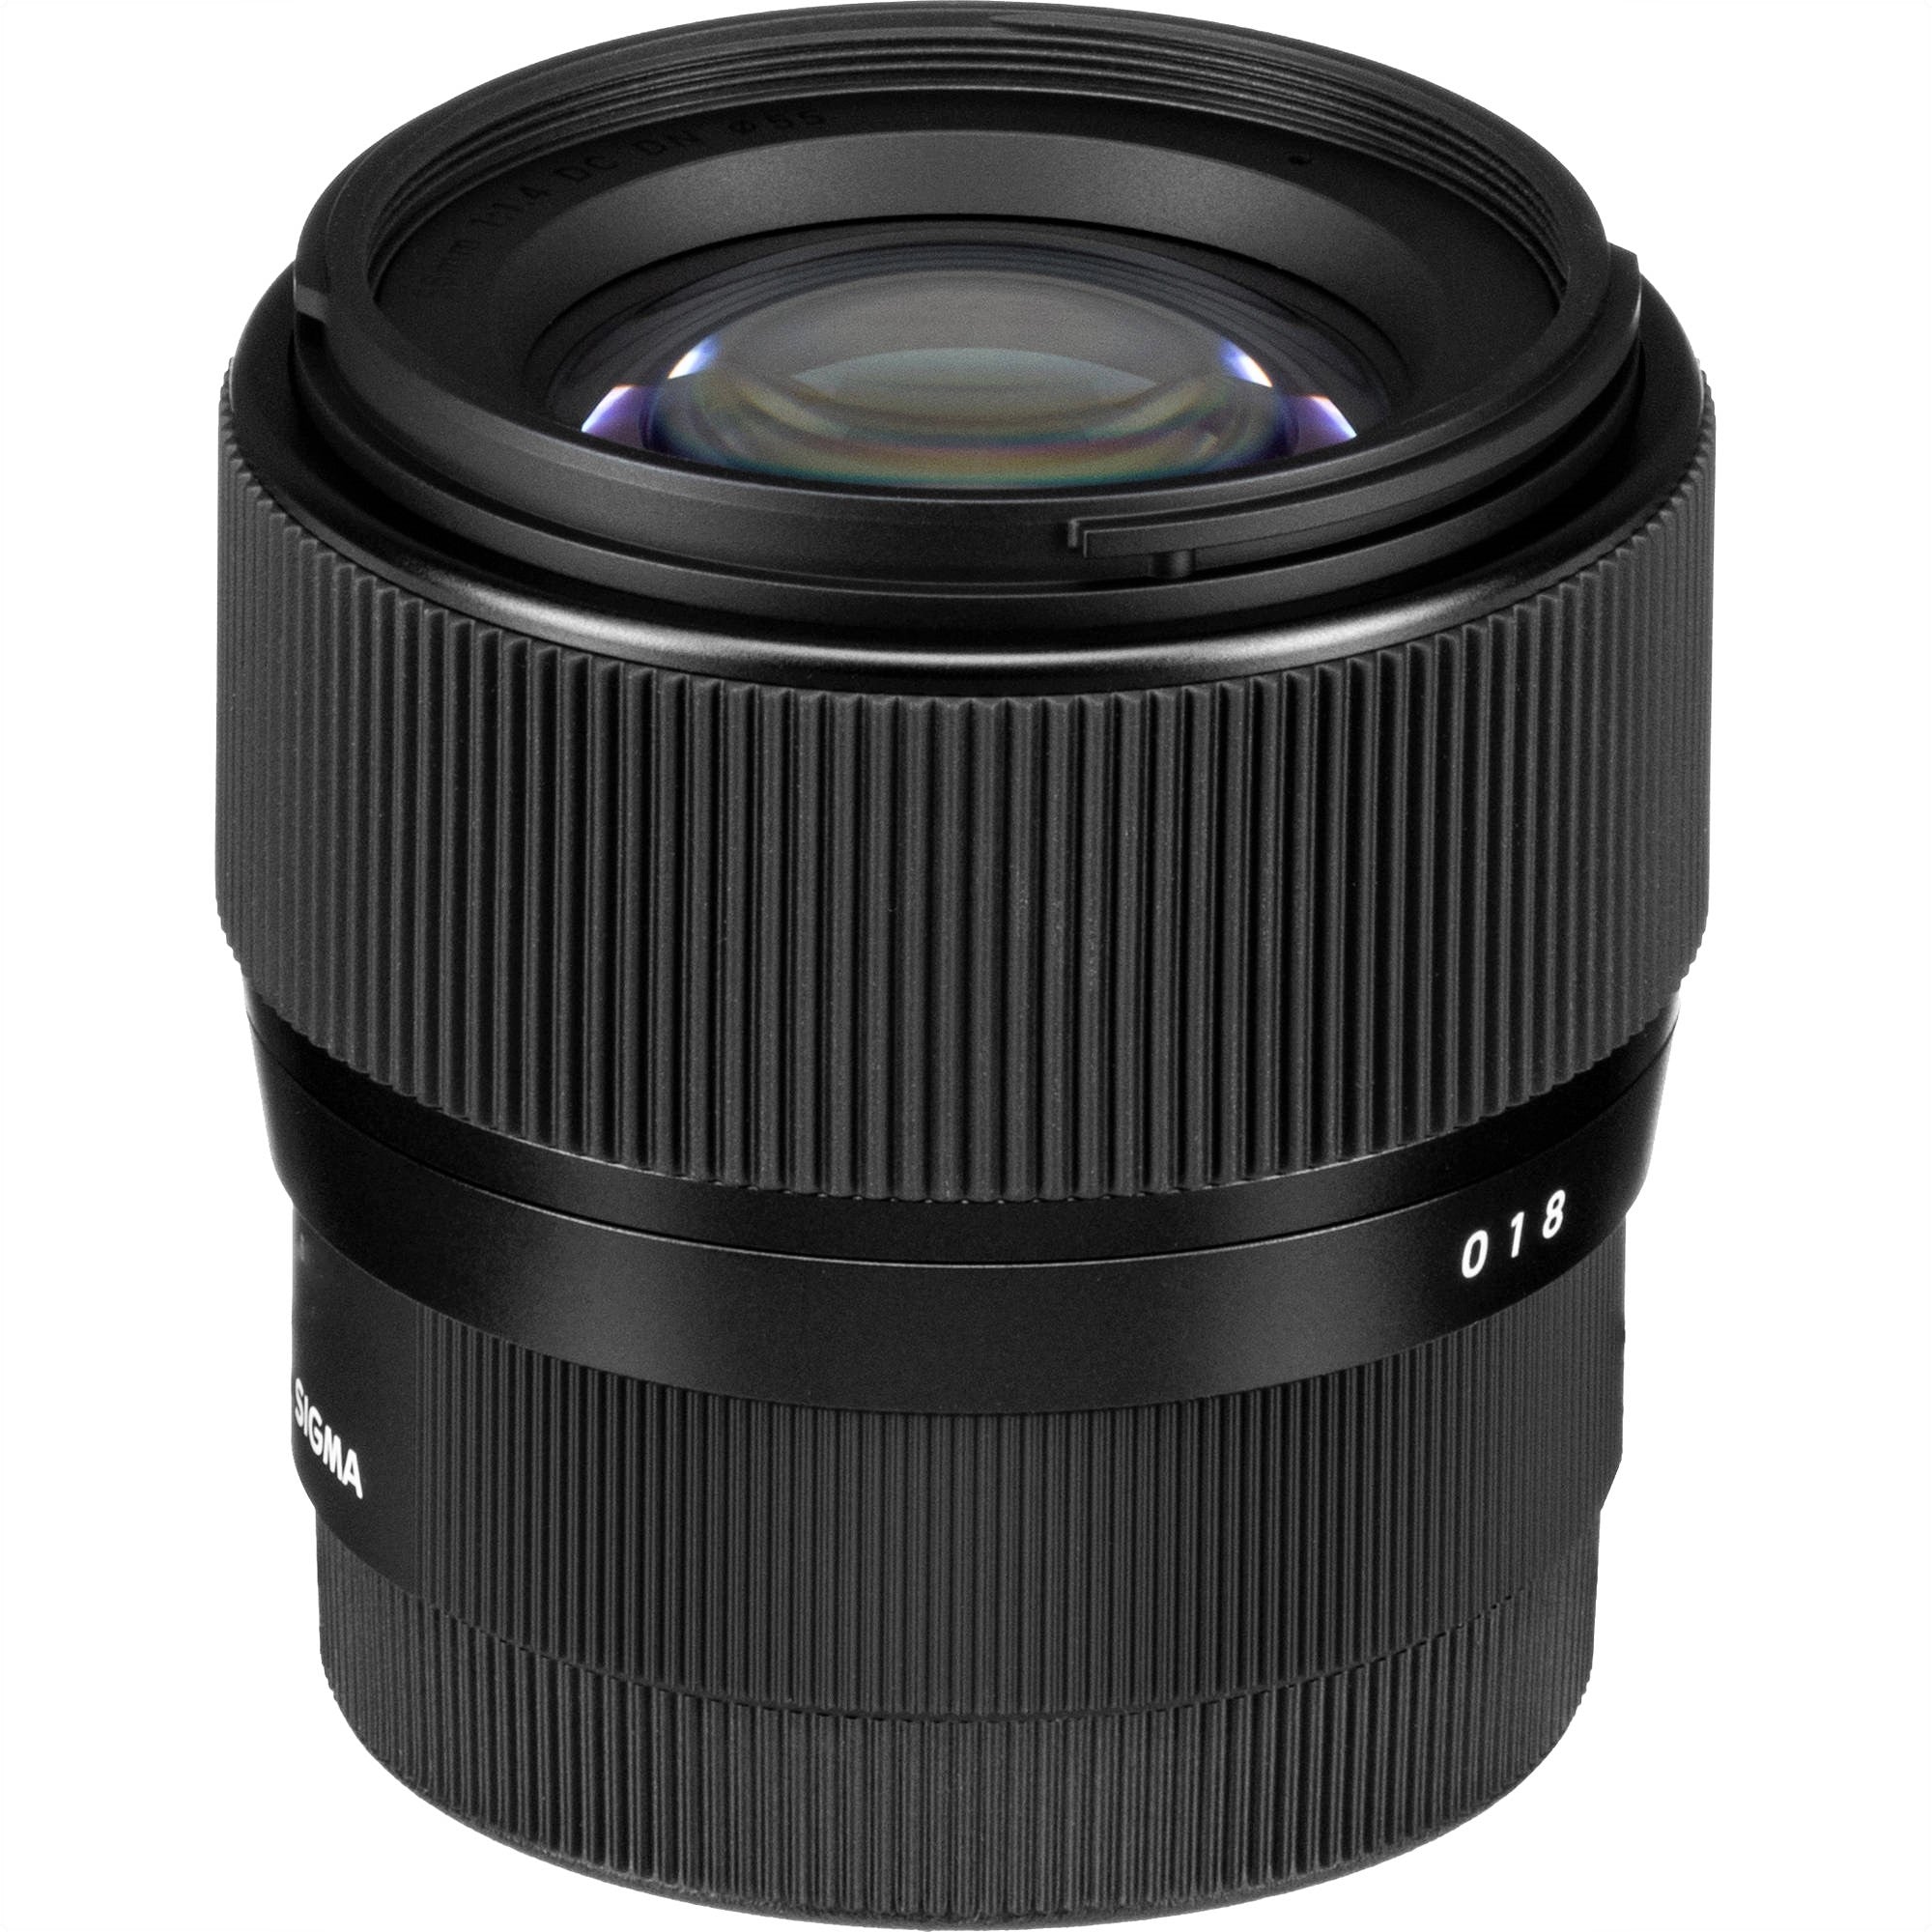 Sigma 56mm f/1.4 DC DN | C review